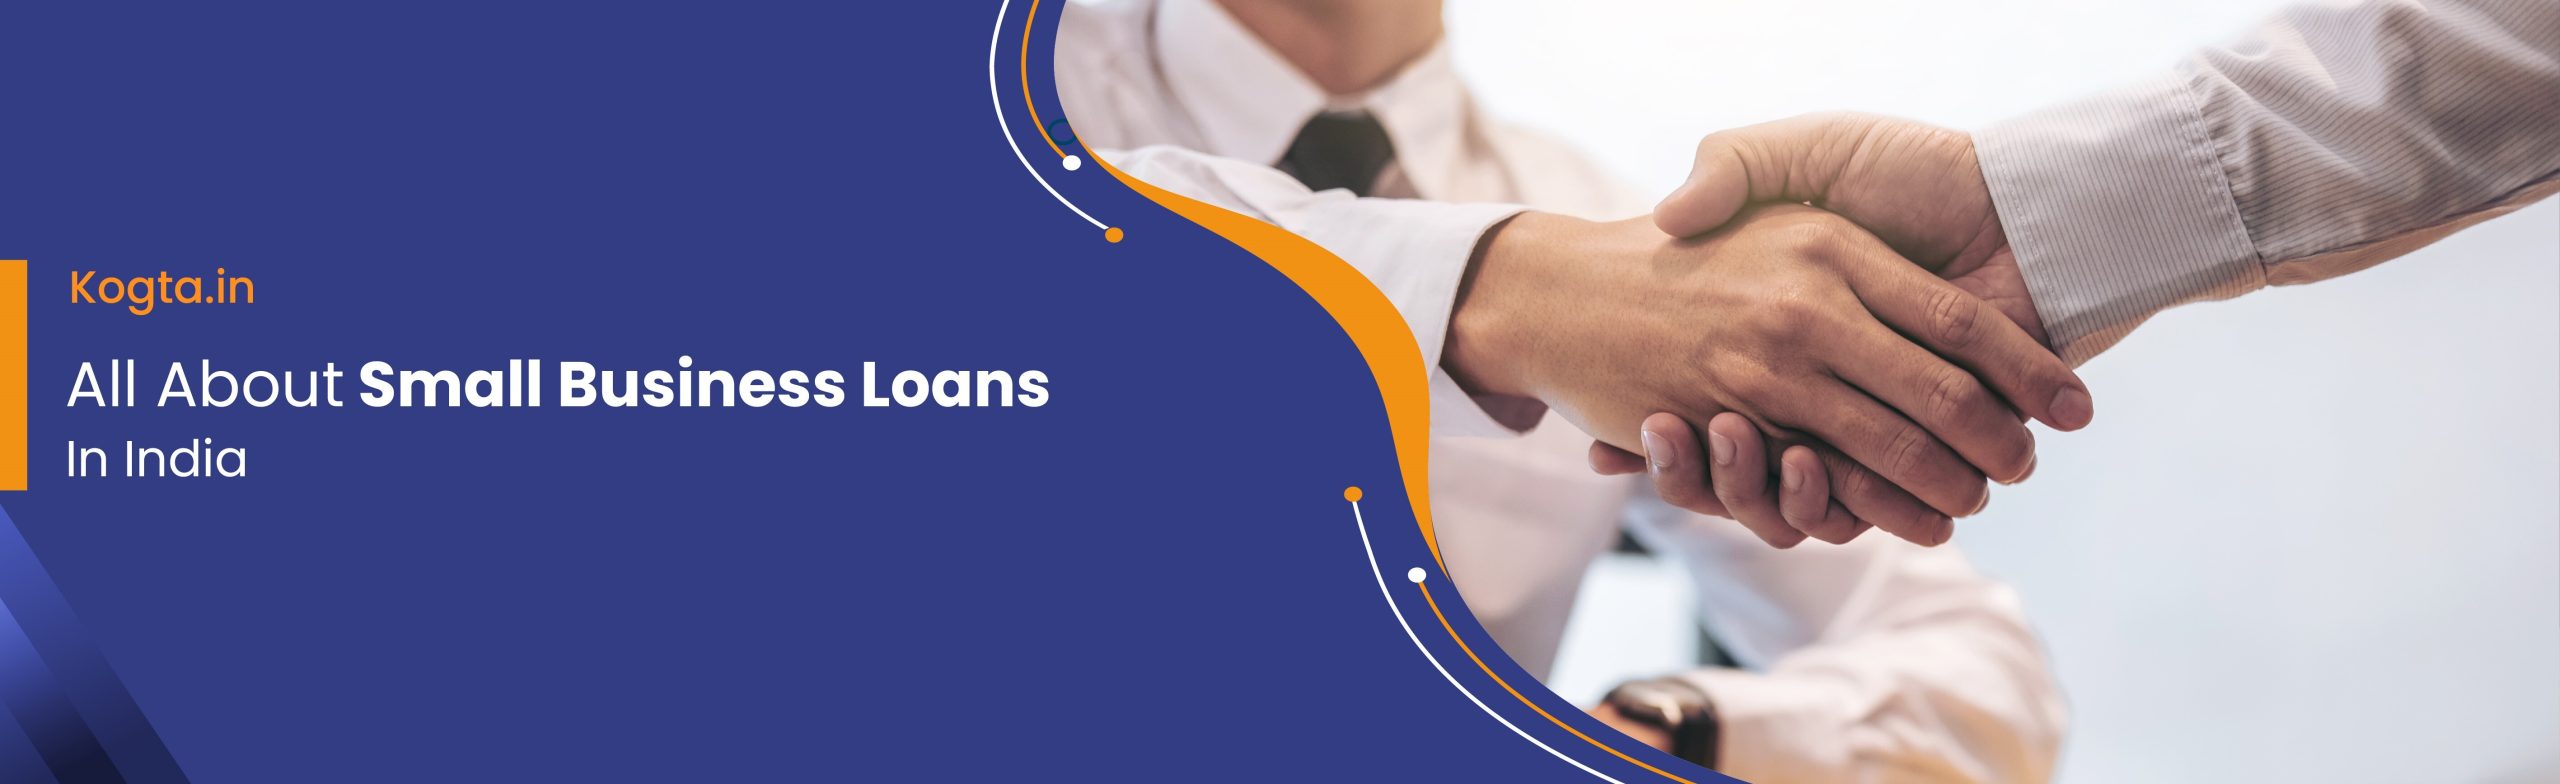 Small Business Loans In India